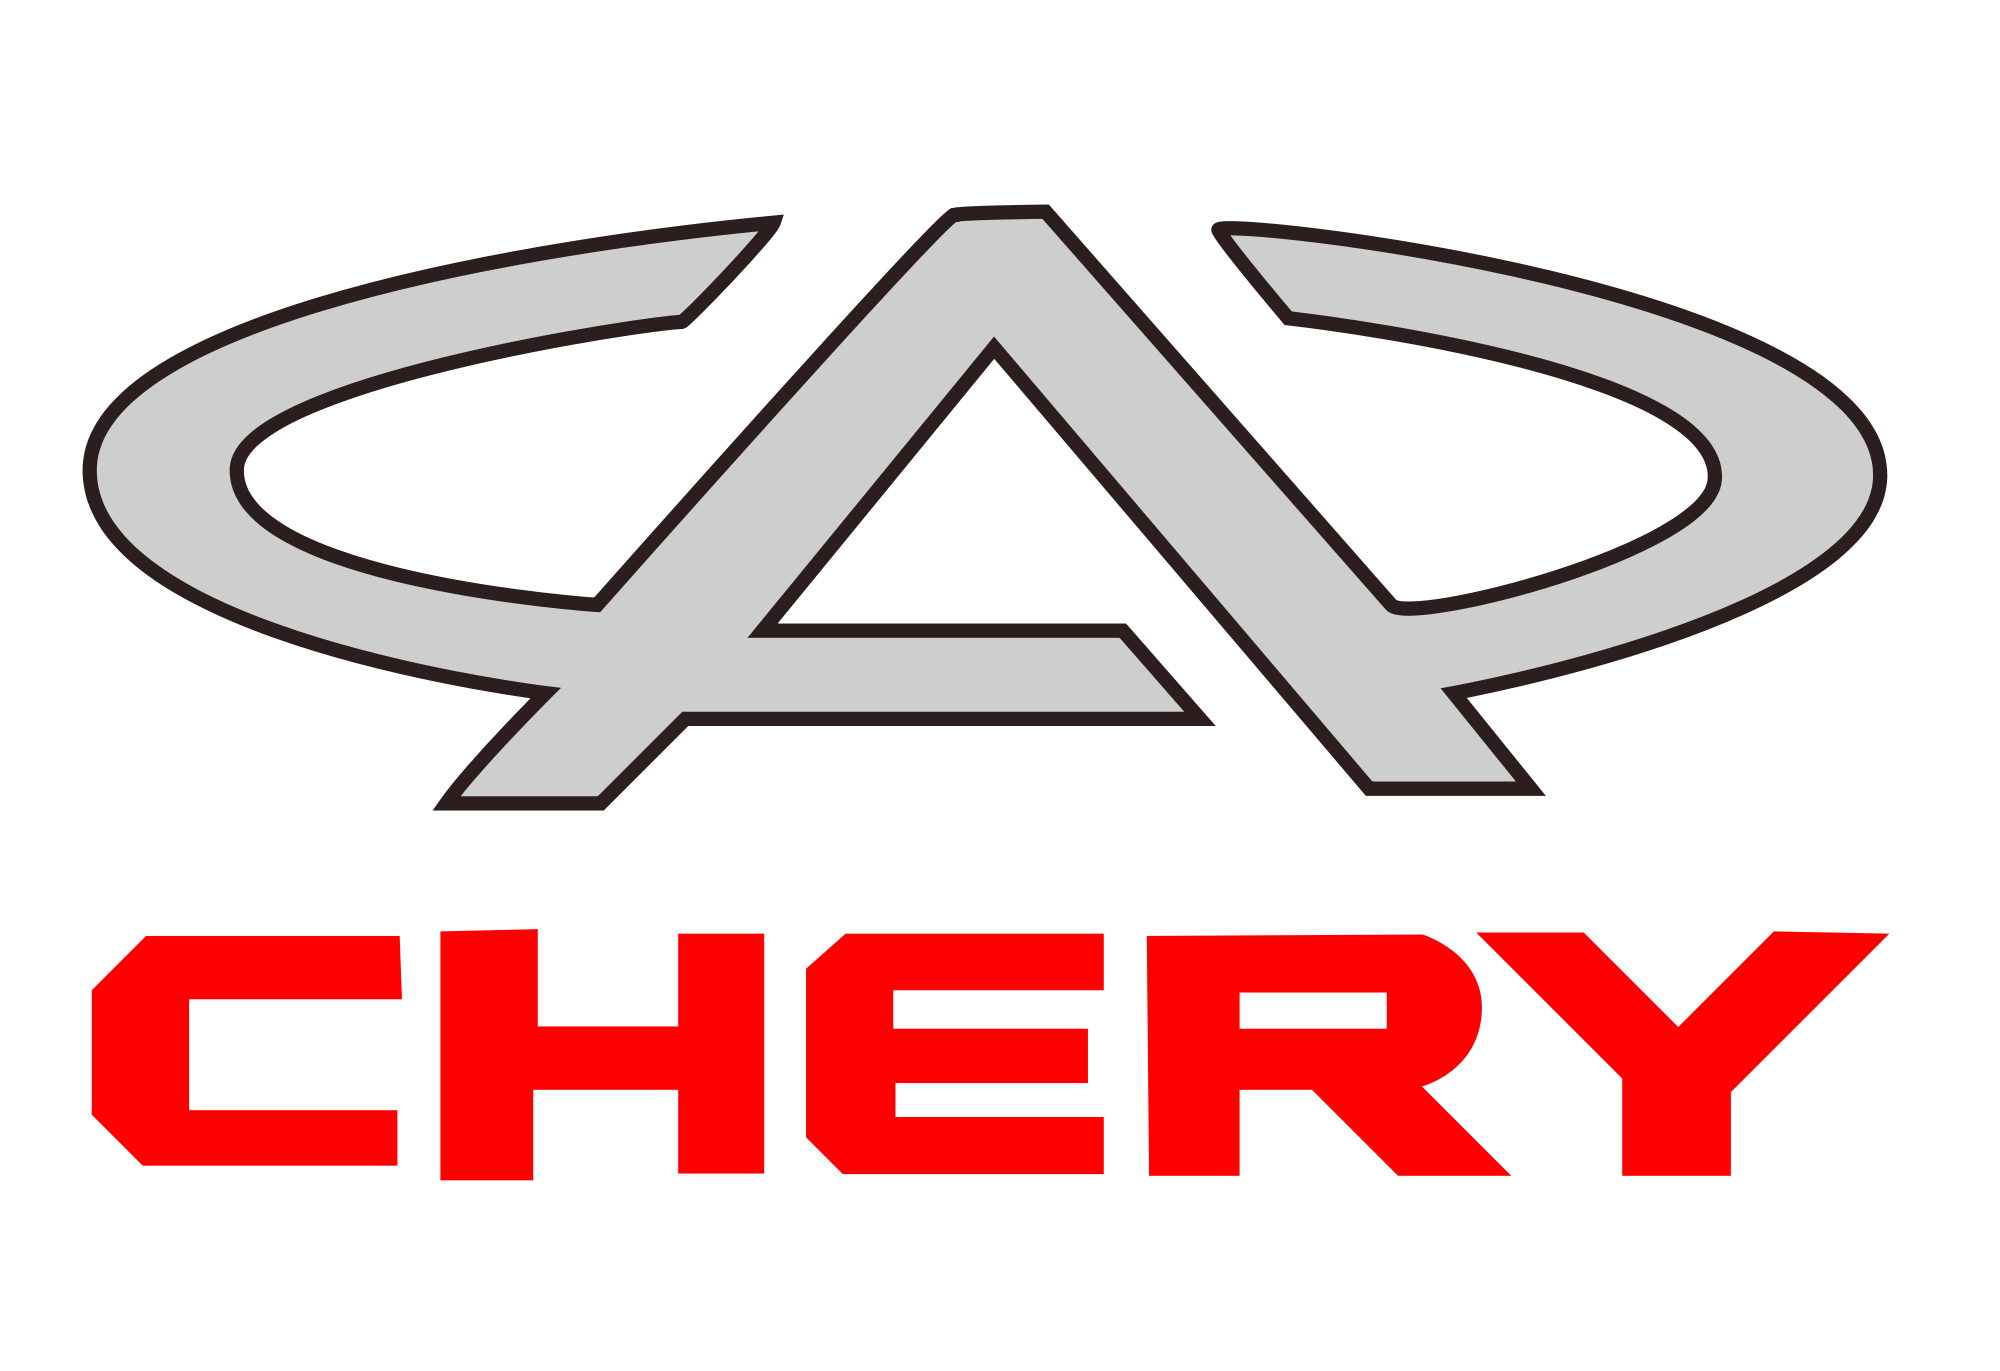 Chery Logo - Chinese Car Brands, Companies and Manufacturers. Car Brand Names.com